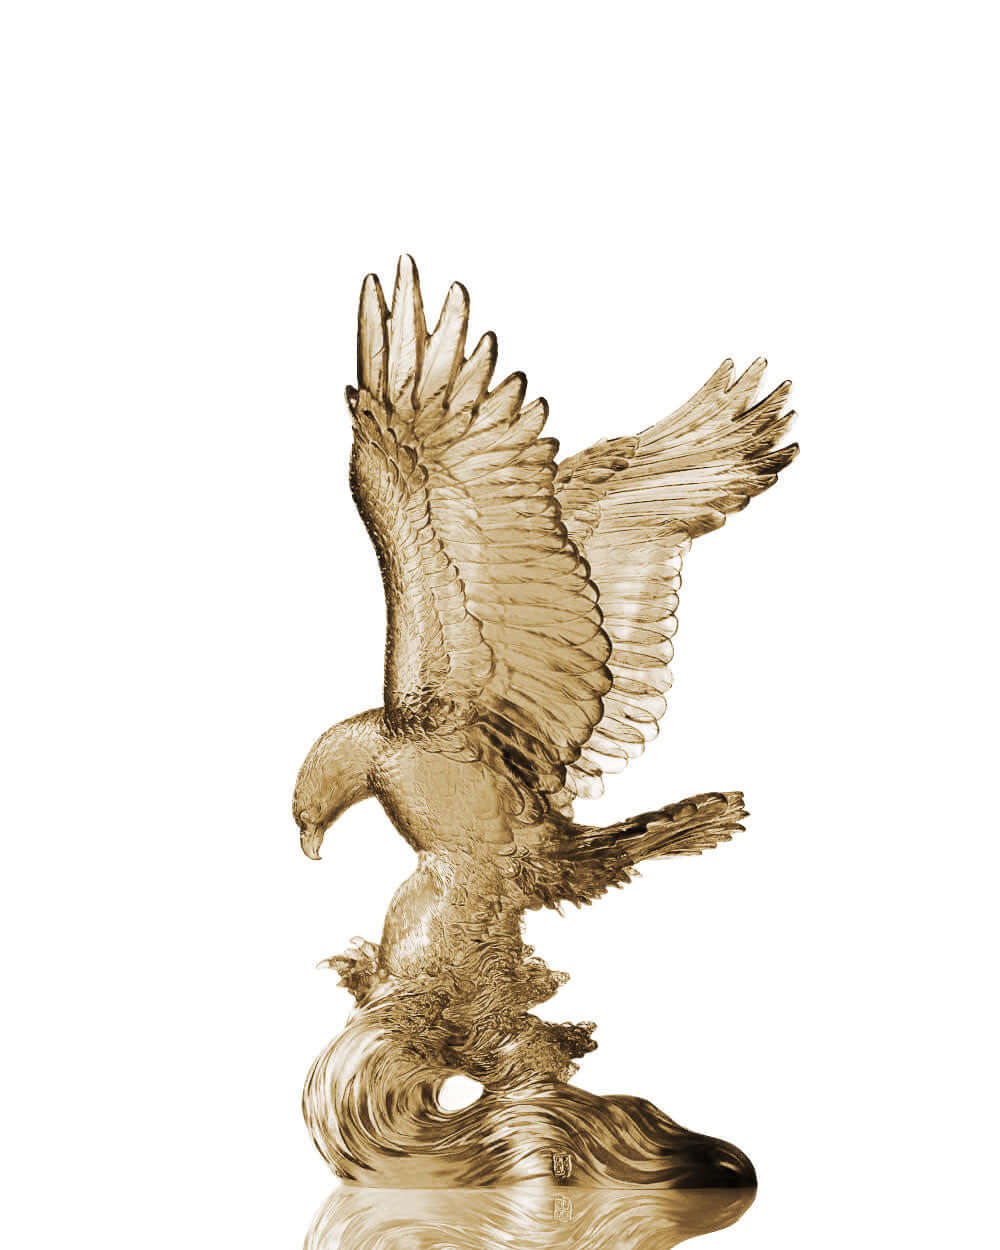 LIULI Crystal Art Crystal American Bald Eagle Figurine, "With a will, A way", US Only Limited Edition, in Brown Purple Clear